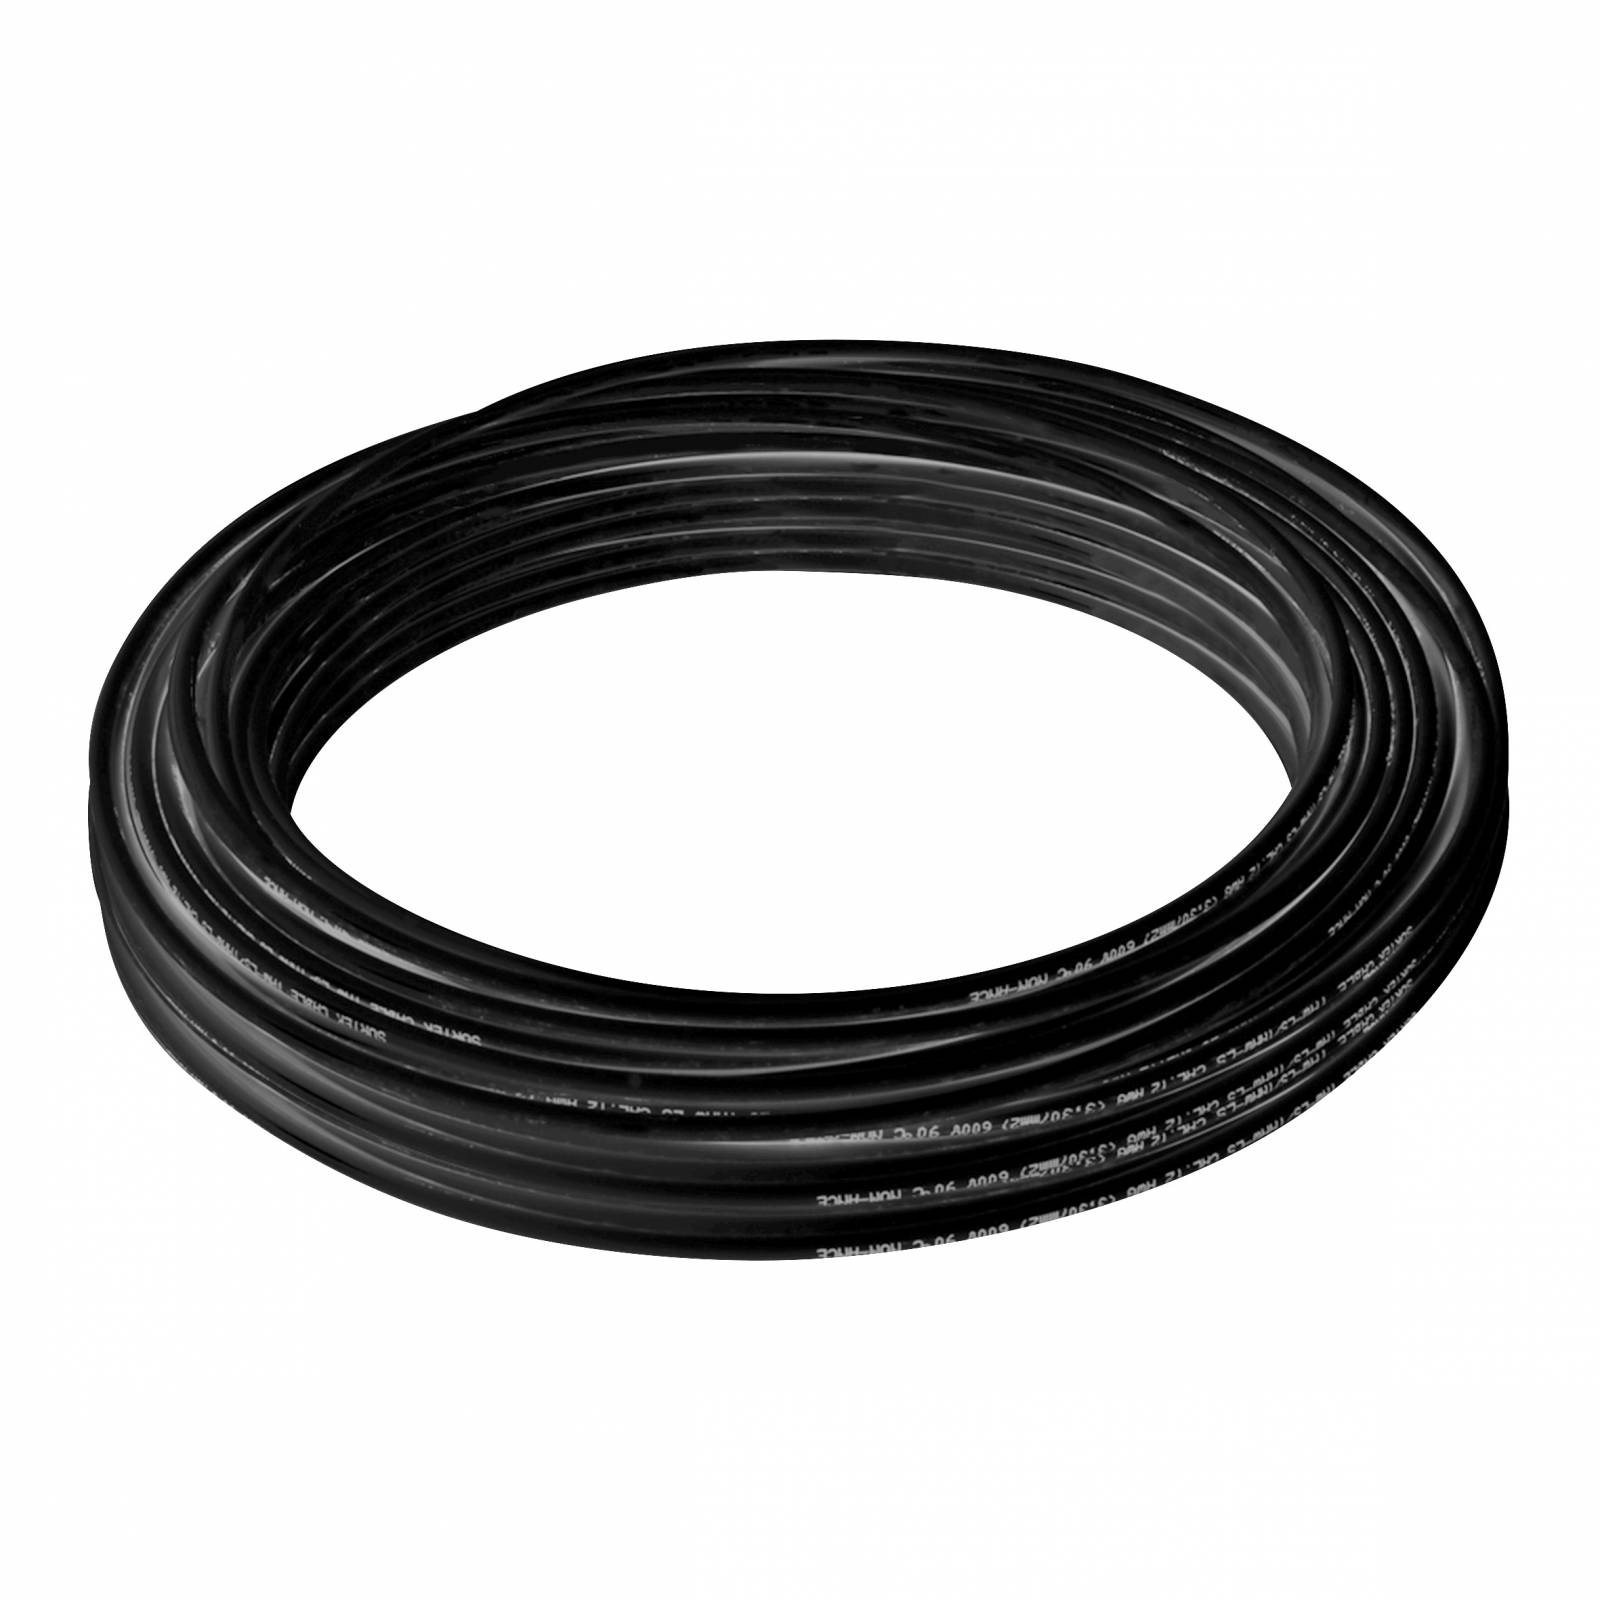 Cable Eléctrico Tipo Thw Lsthhw Ls Cal10 100m Negro 136914 0470